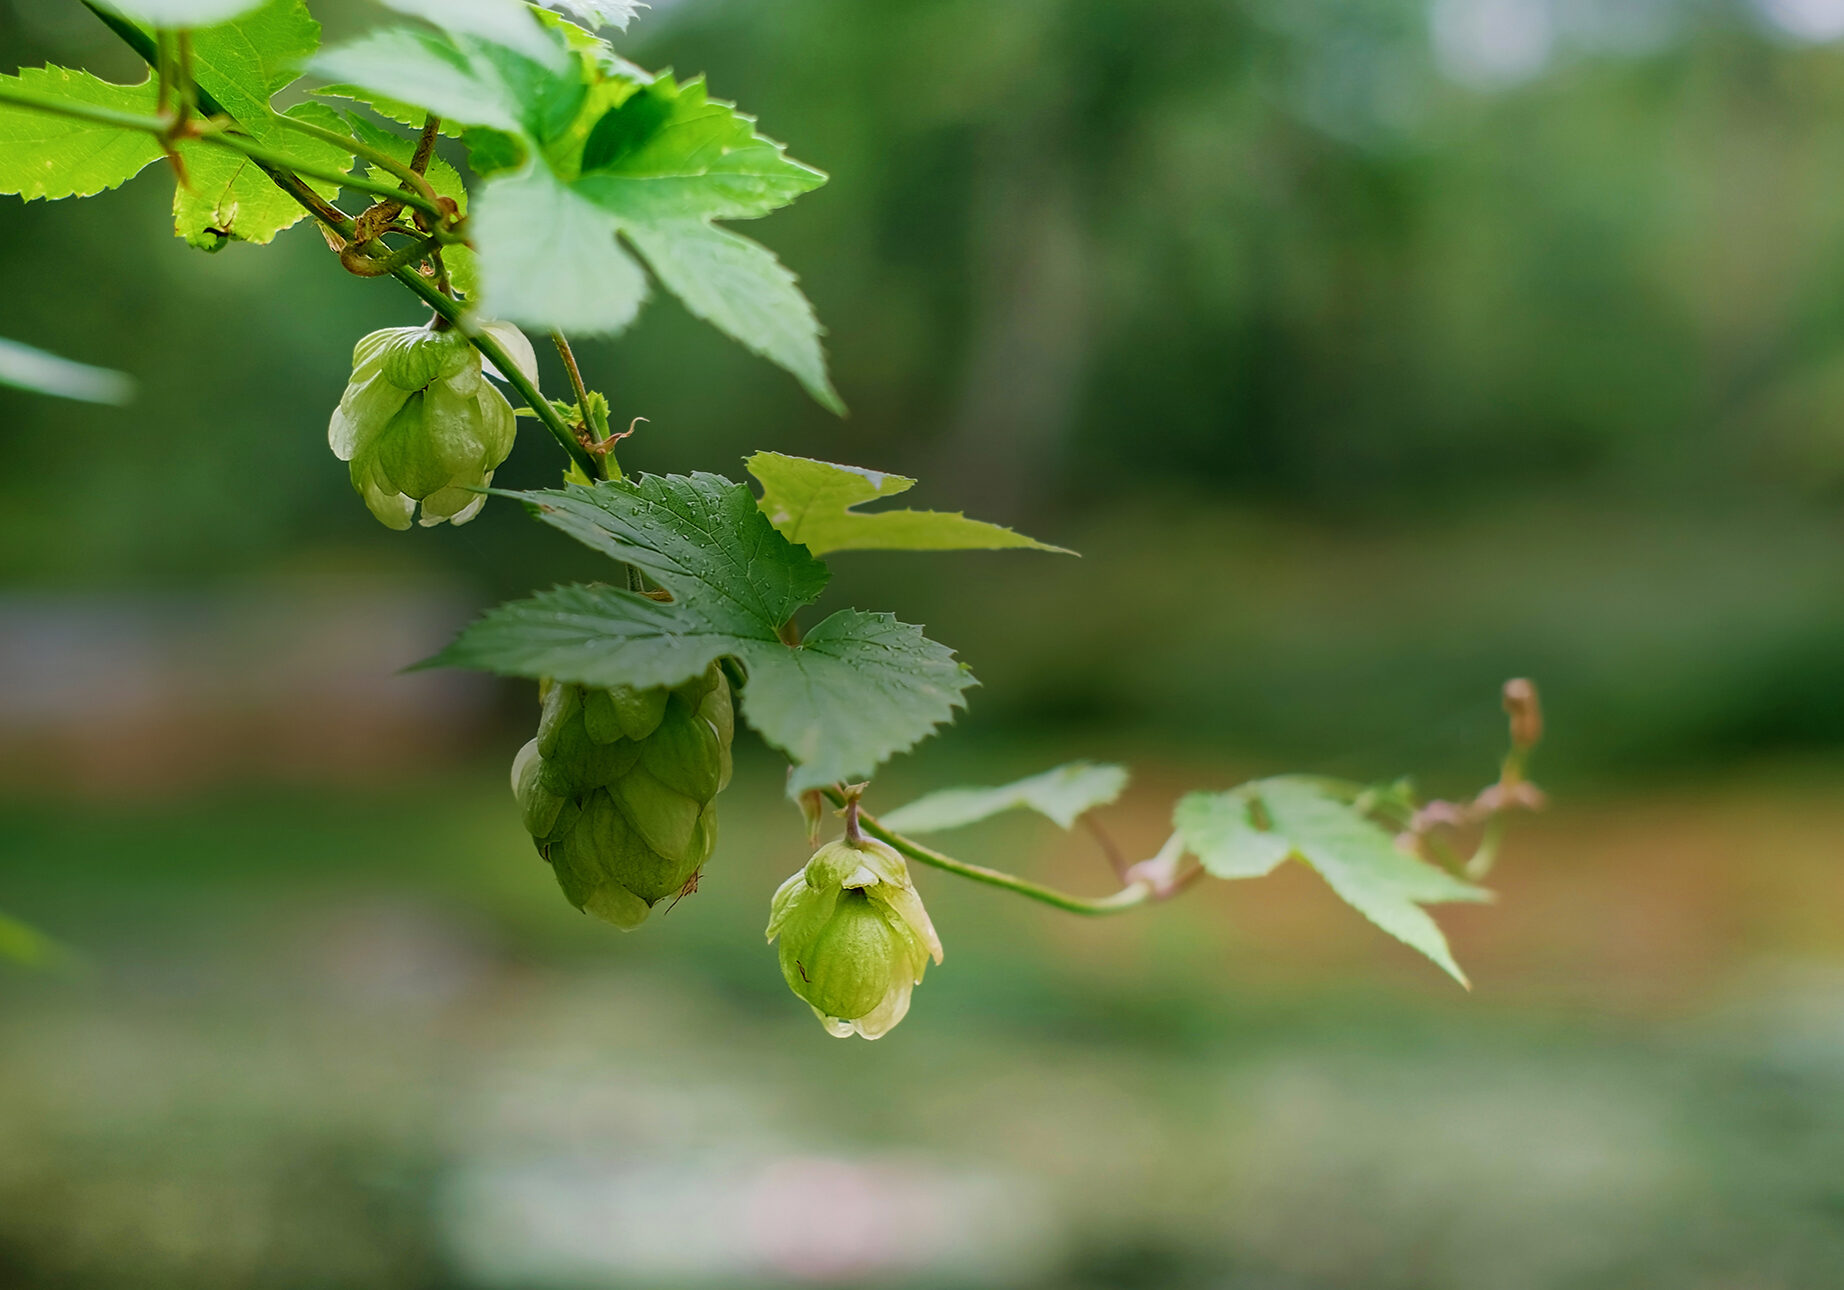 Green fresh hop cones in water drops, selective focus on the cones. Hops for making beer and bread, agricultural background with copy space. Details of hop cones before harvest